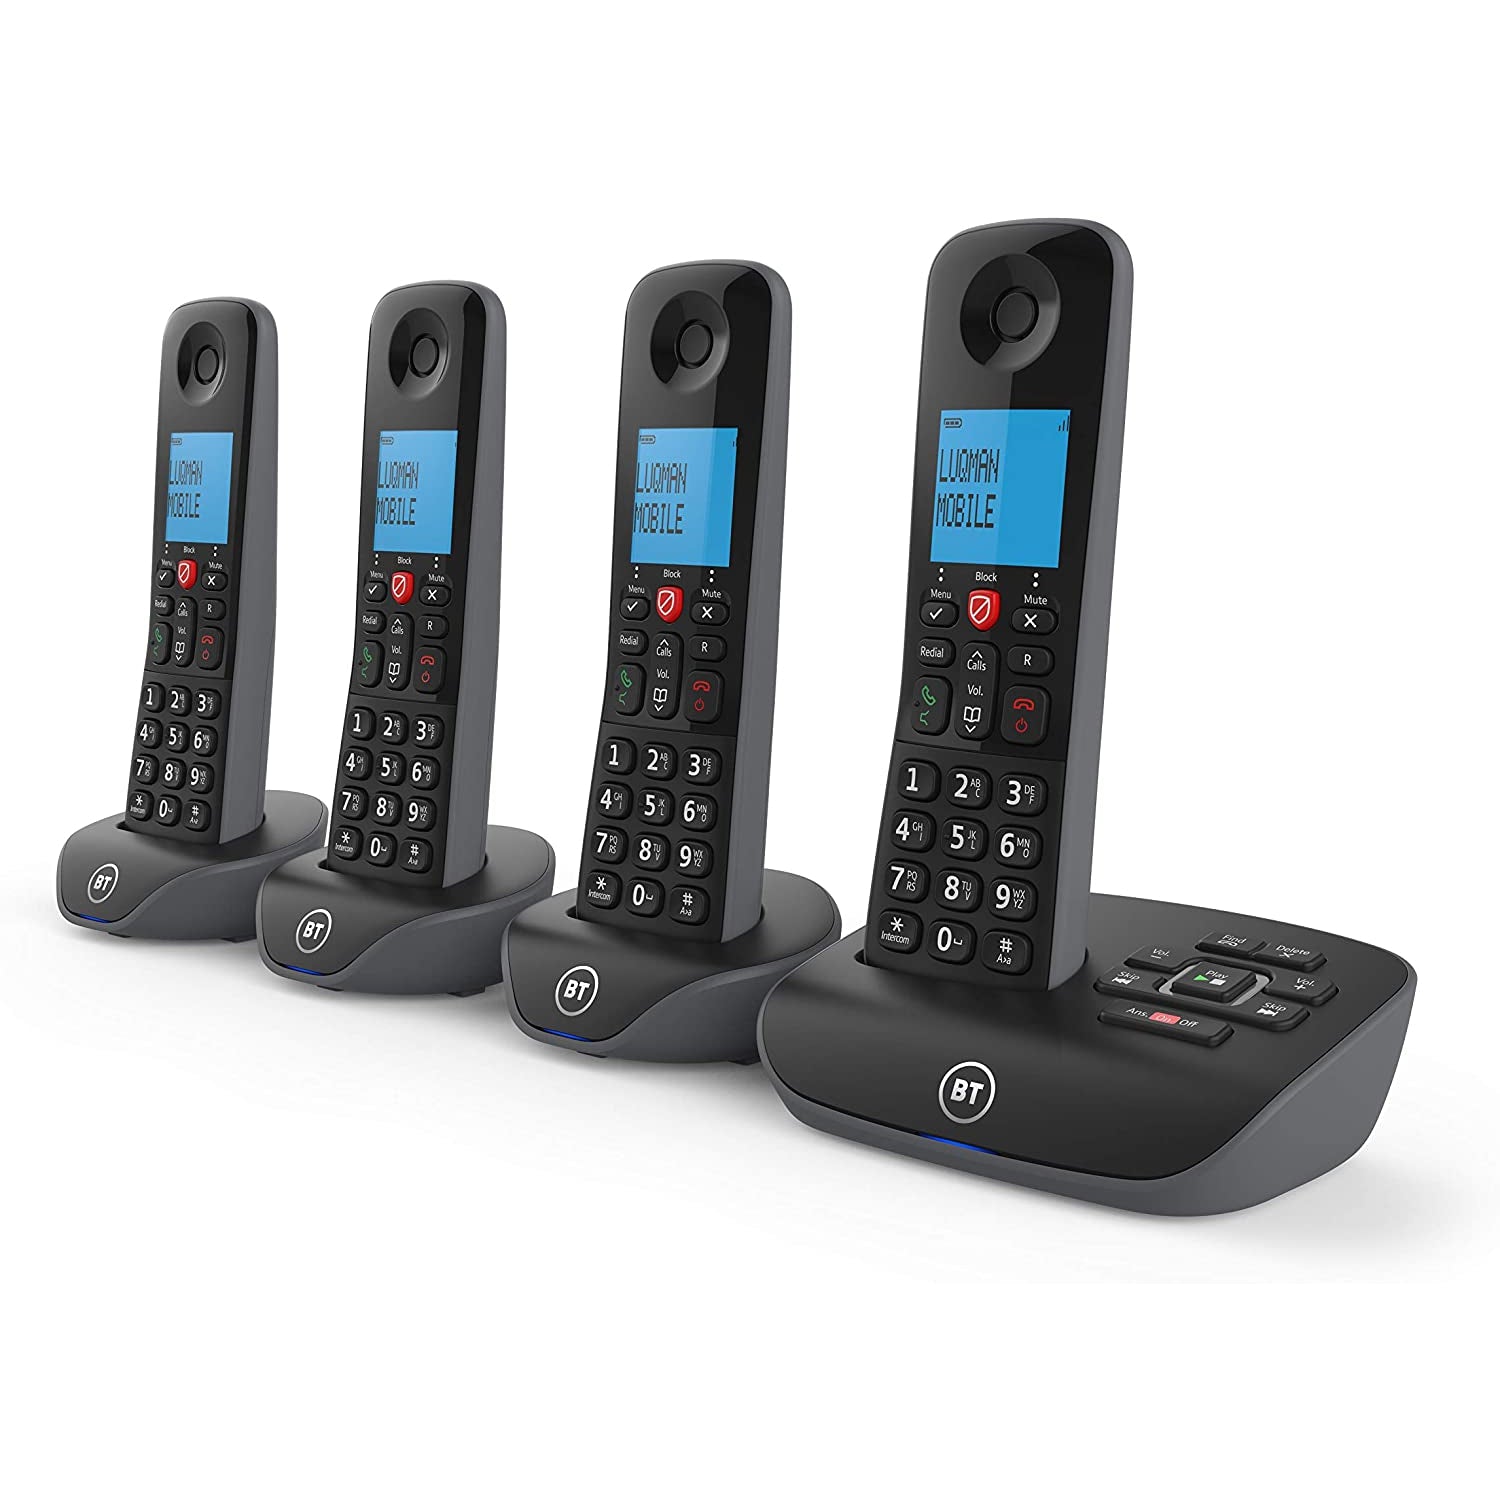 BT 90660 Essential Cordless Home Phone with Nuisance Call Blocking and Answering Machine, Quad Handset Pack, Black